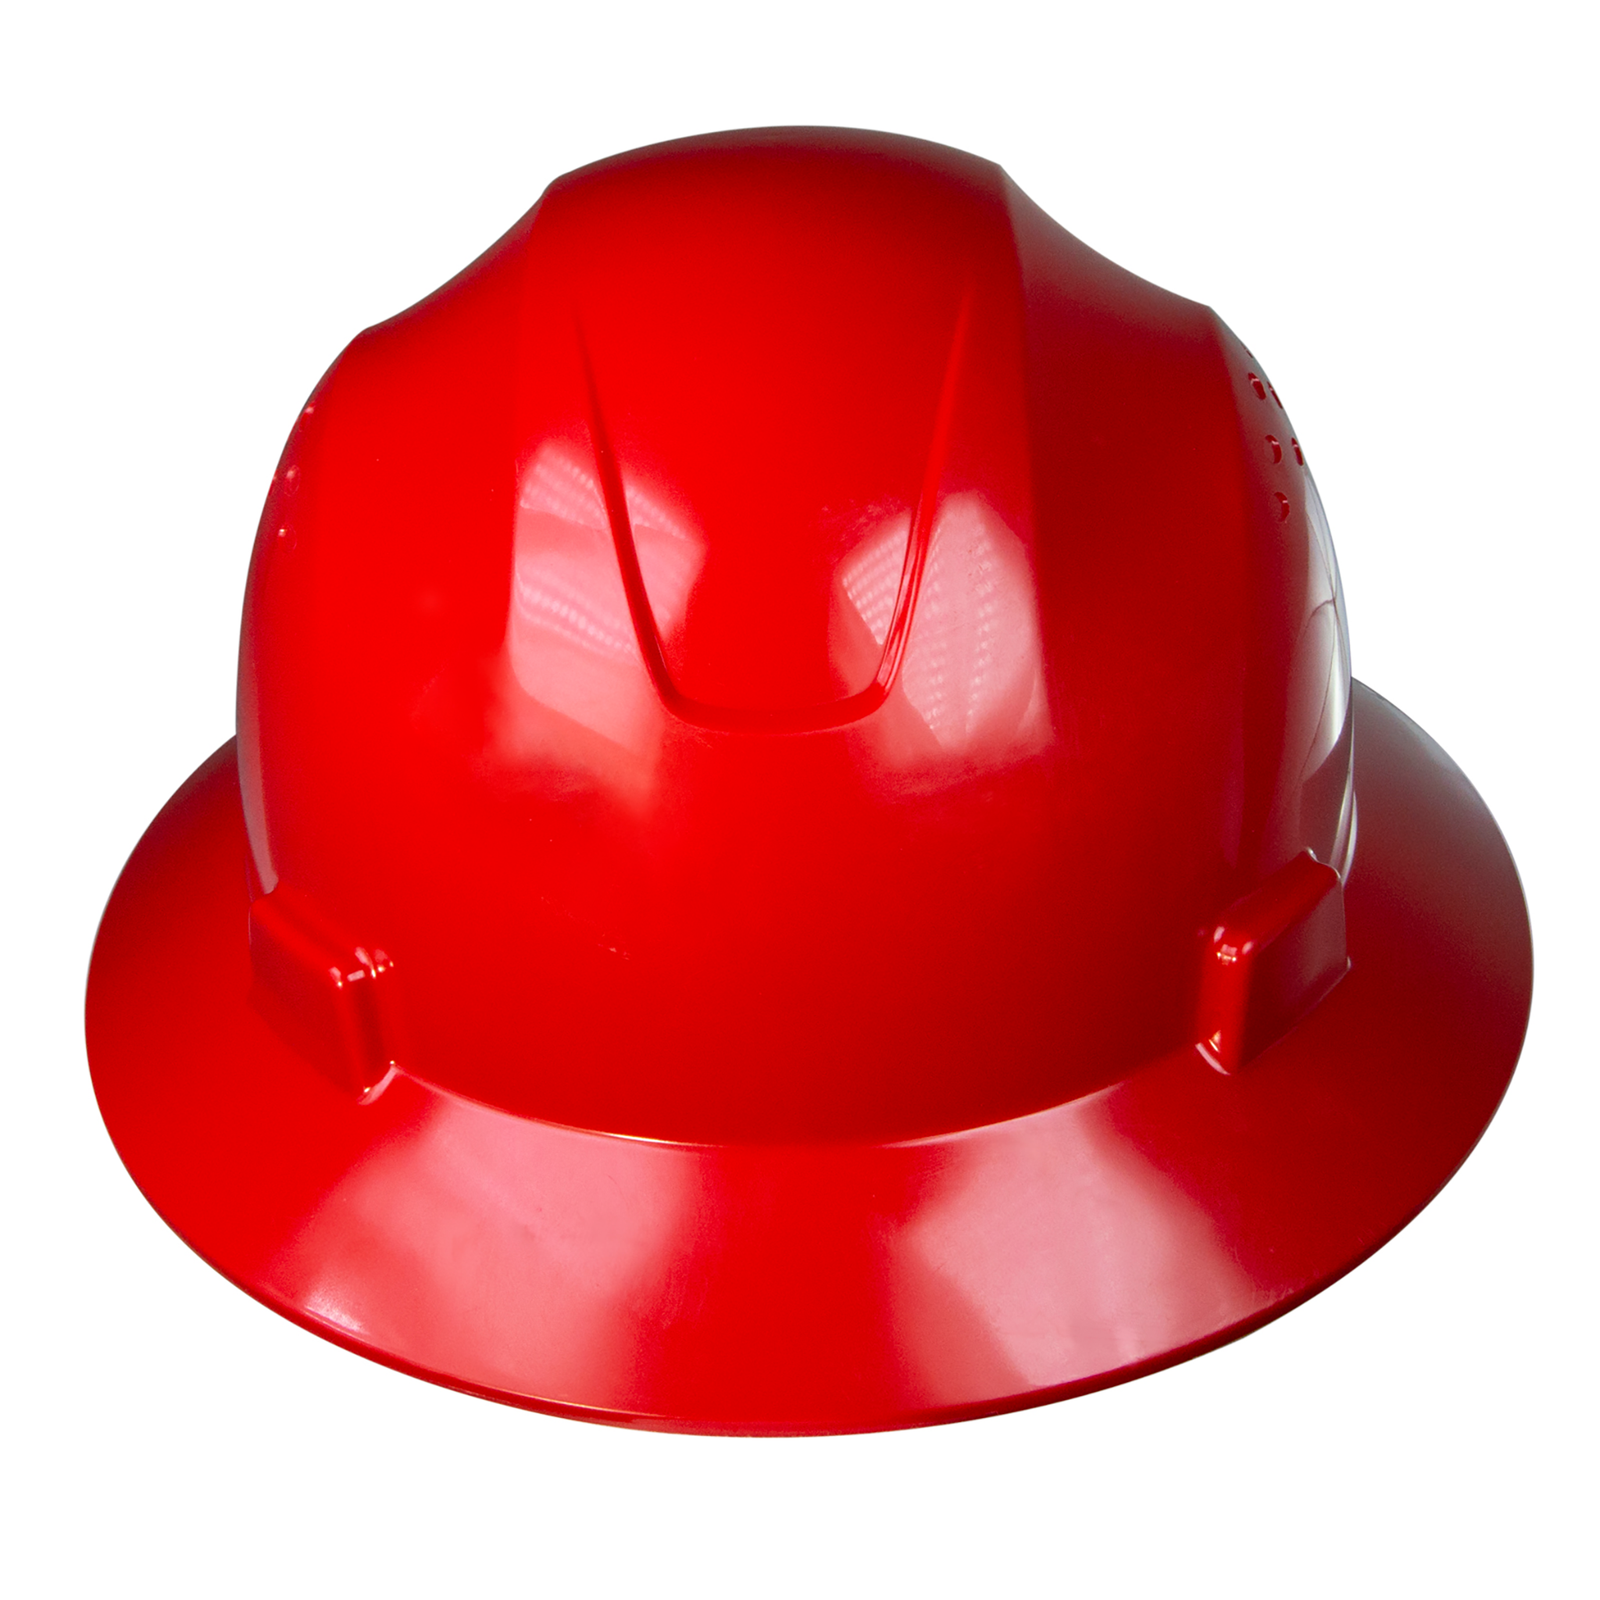 Full Brim Helmet for Impact and Electrical Protection